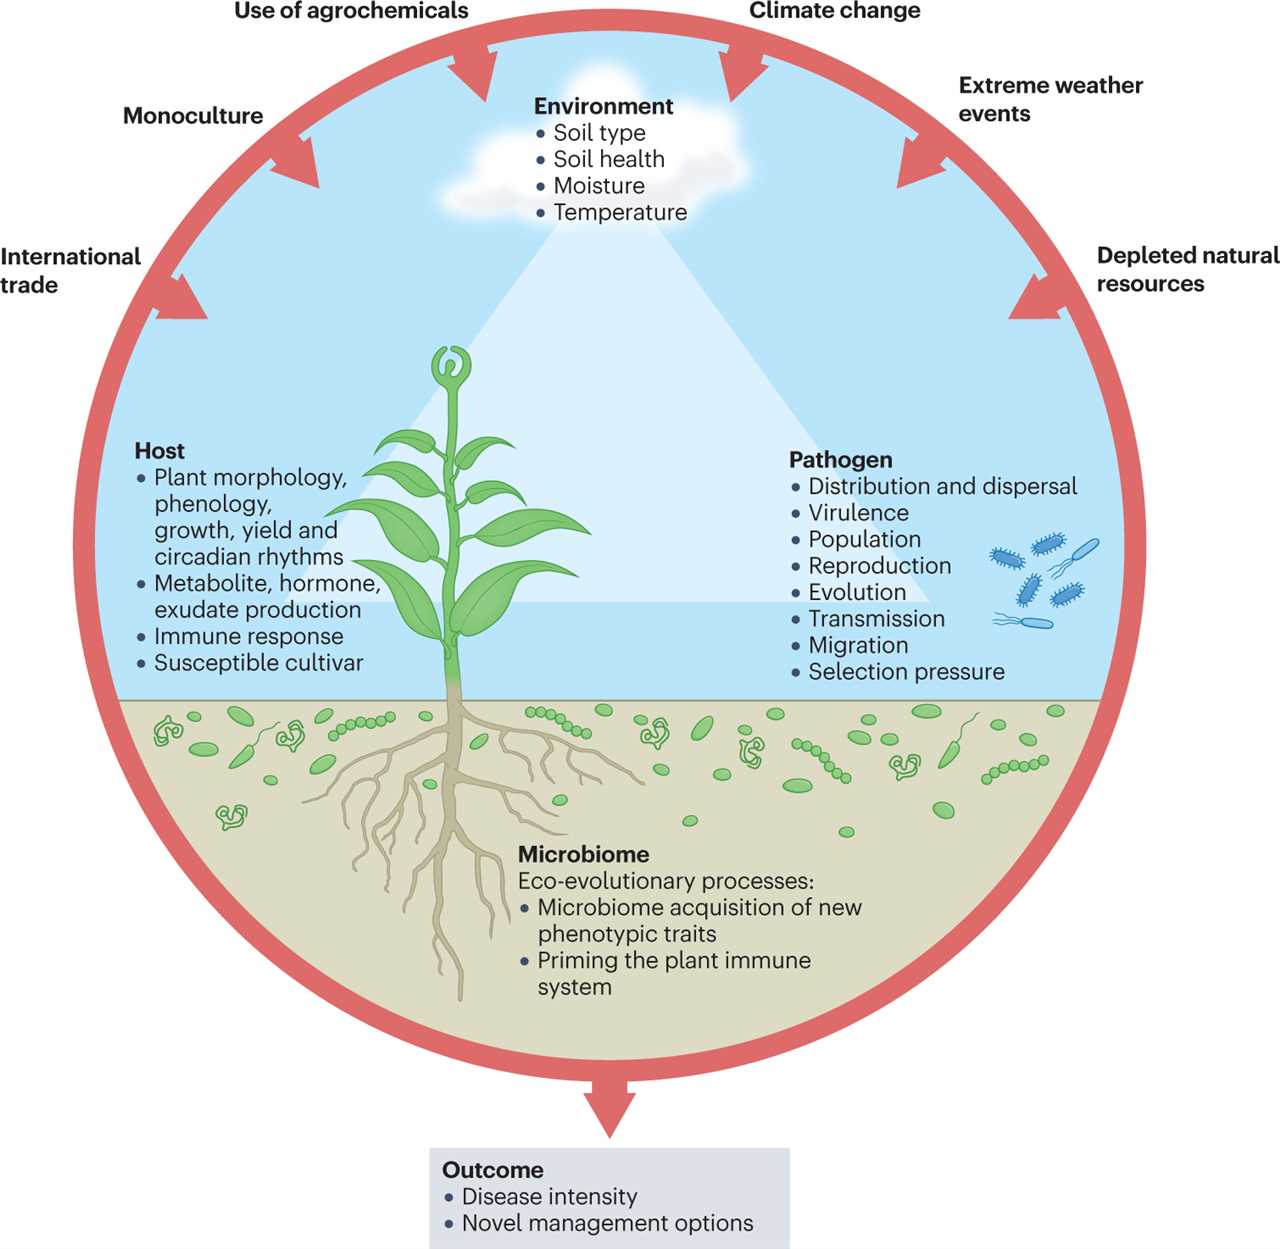 Resilient Microbes Adaptation and Survival in Challenging Environments